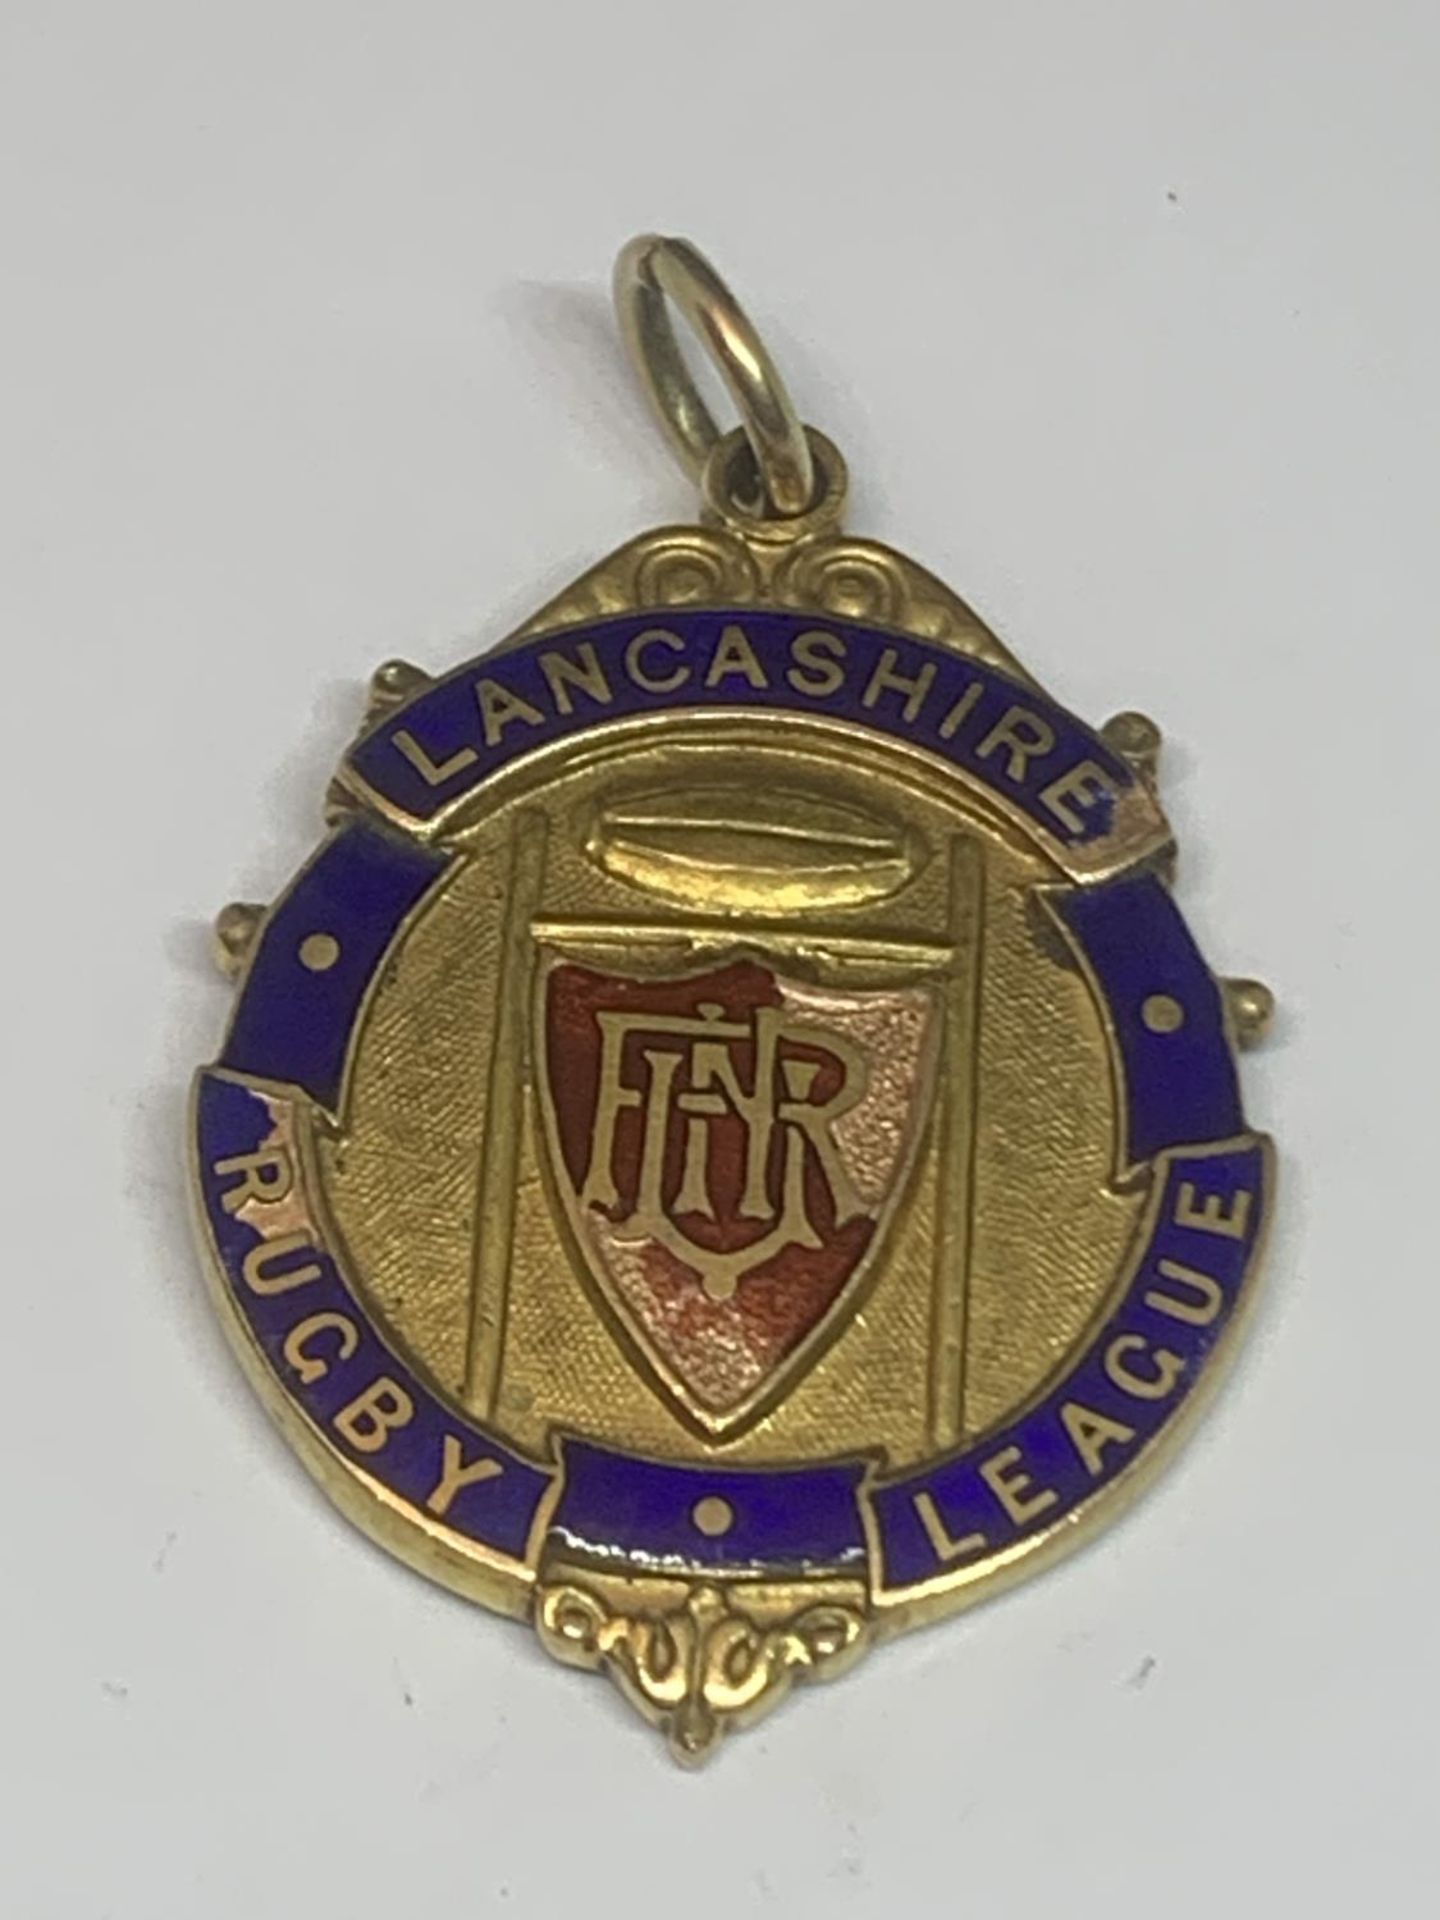 A HALLMARKED 9 CARAT GOLD LANCASHIRE RUGBY LEAGUE MEDAL ENGRAVED WINNERS 1932-33 SALFORD F.C., S.E.